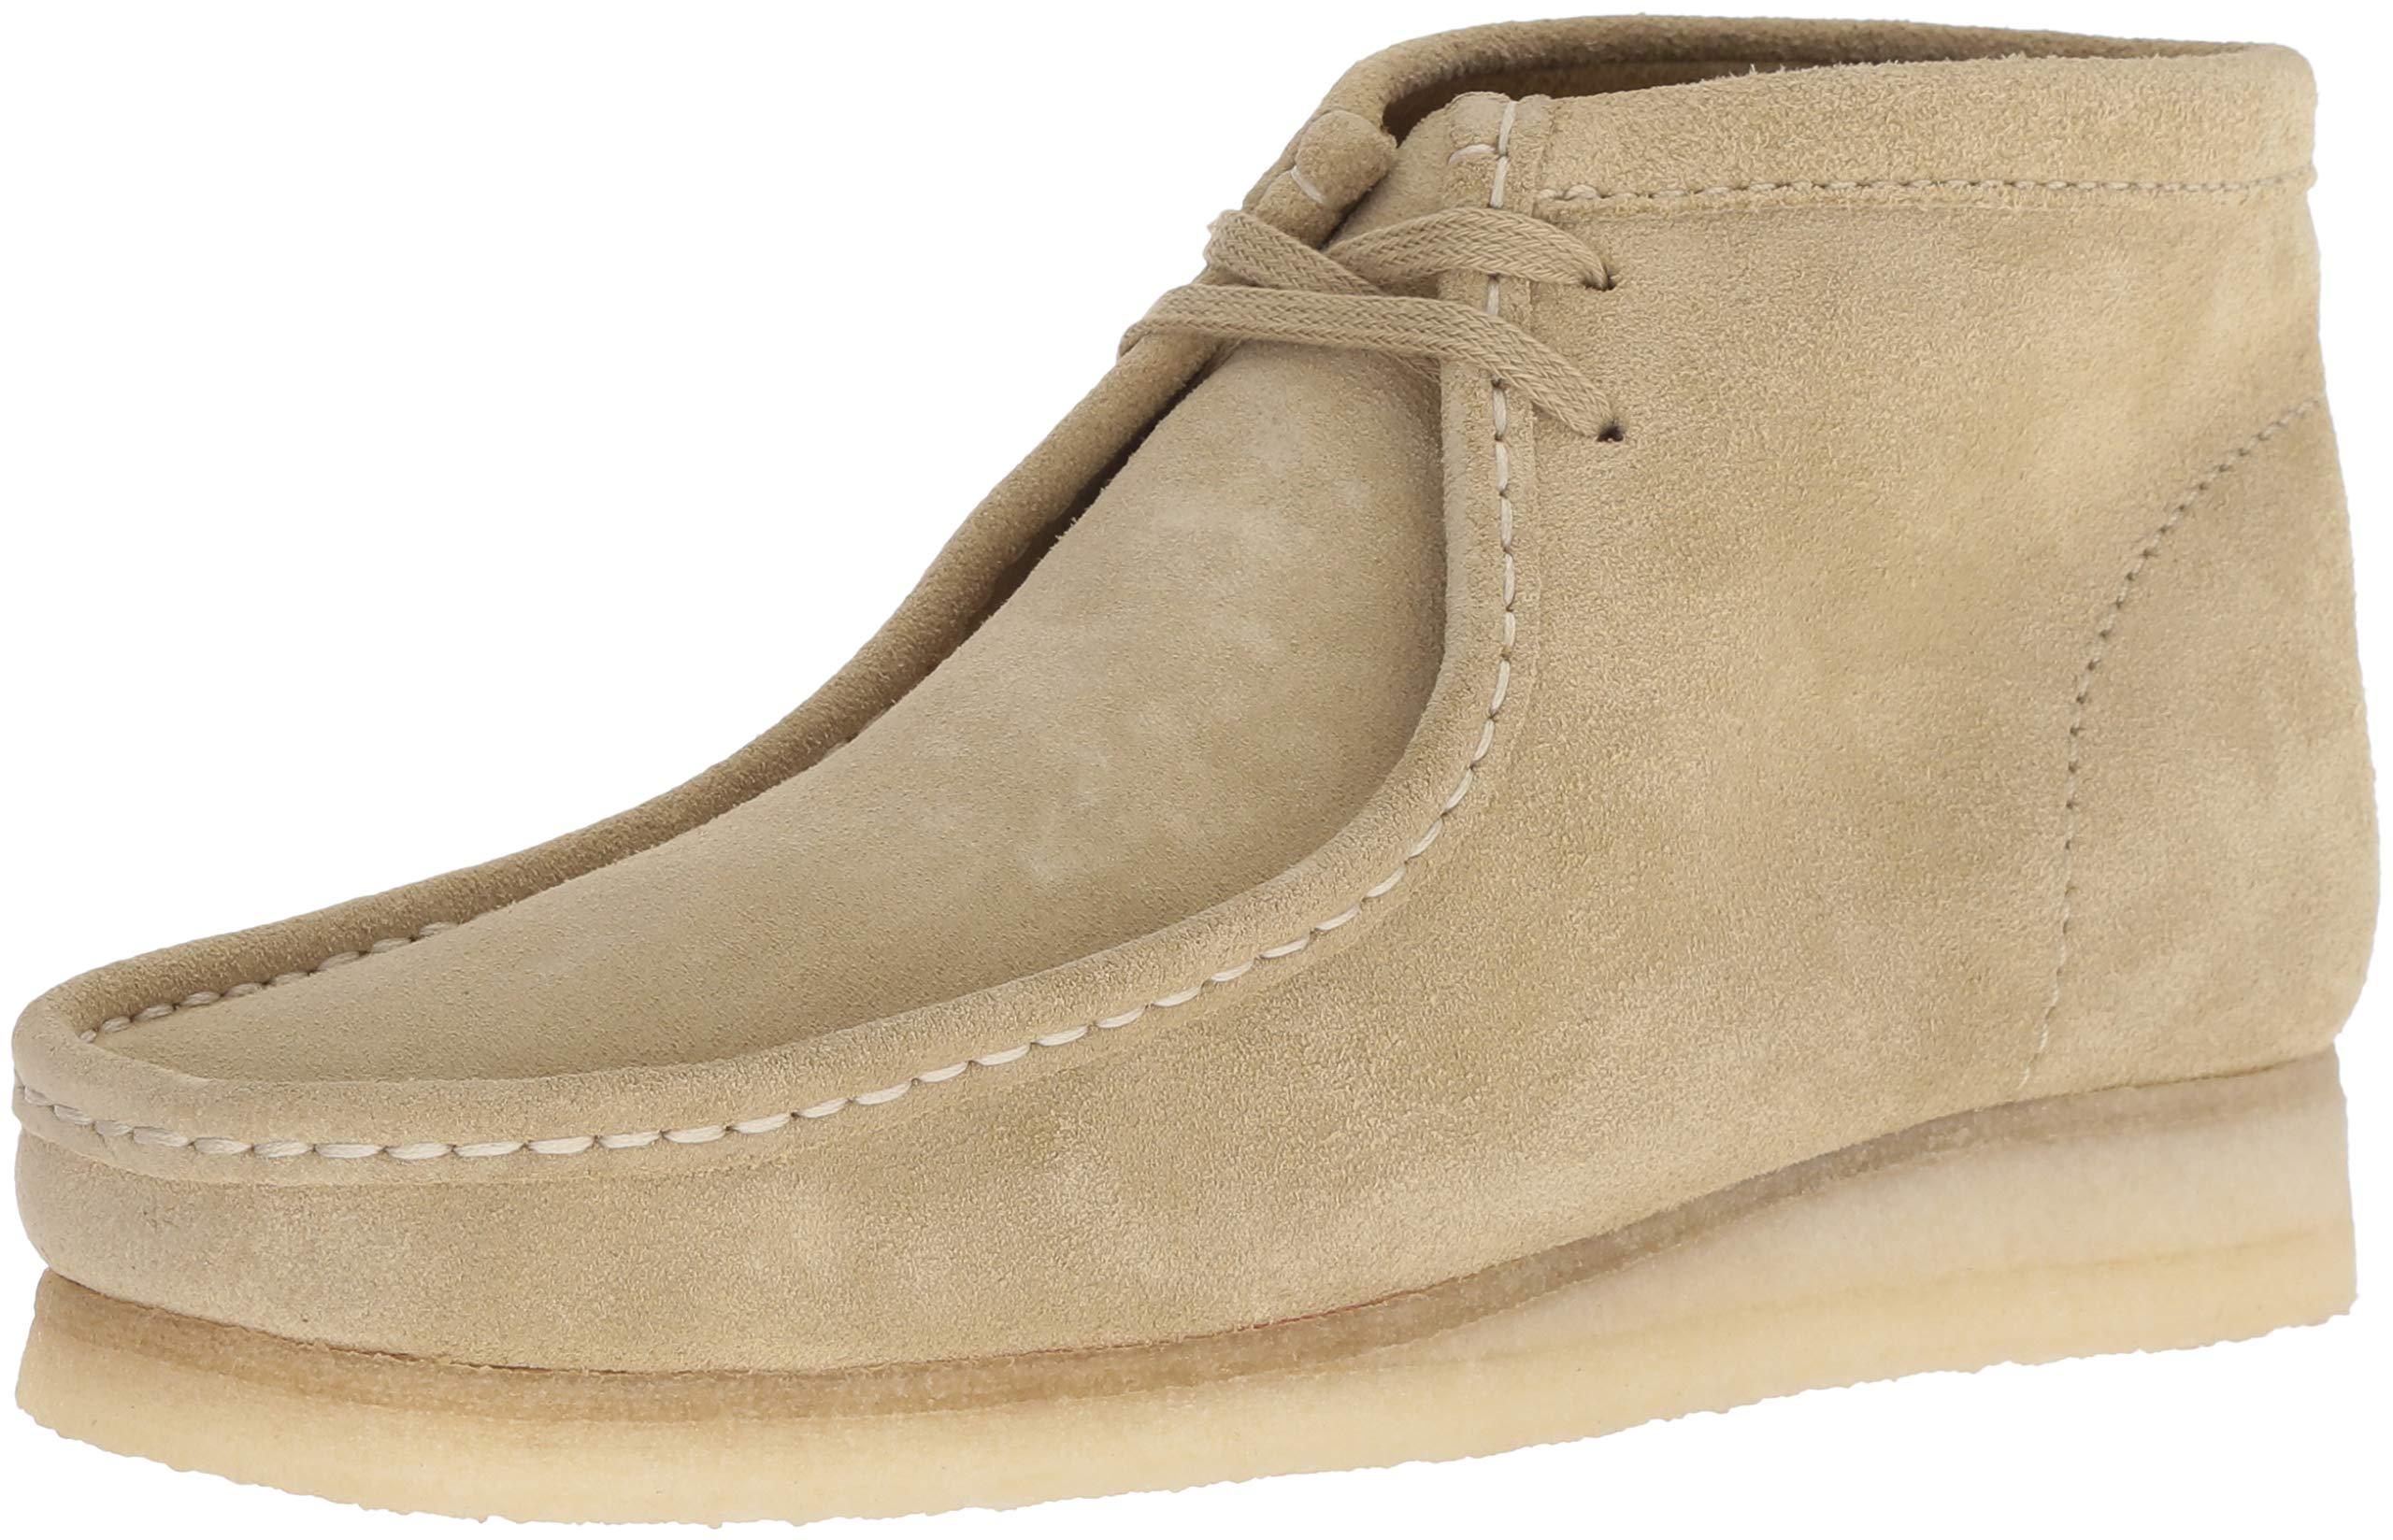 Clarks Leather Wallabee Suede Chukka Boots in Green for Men - Save 34% ...